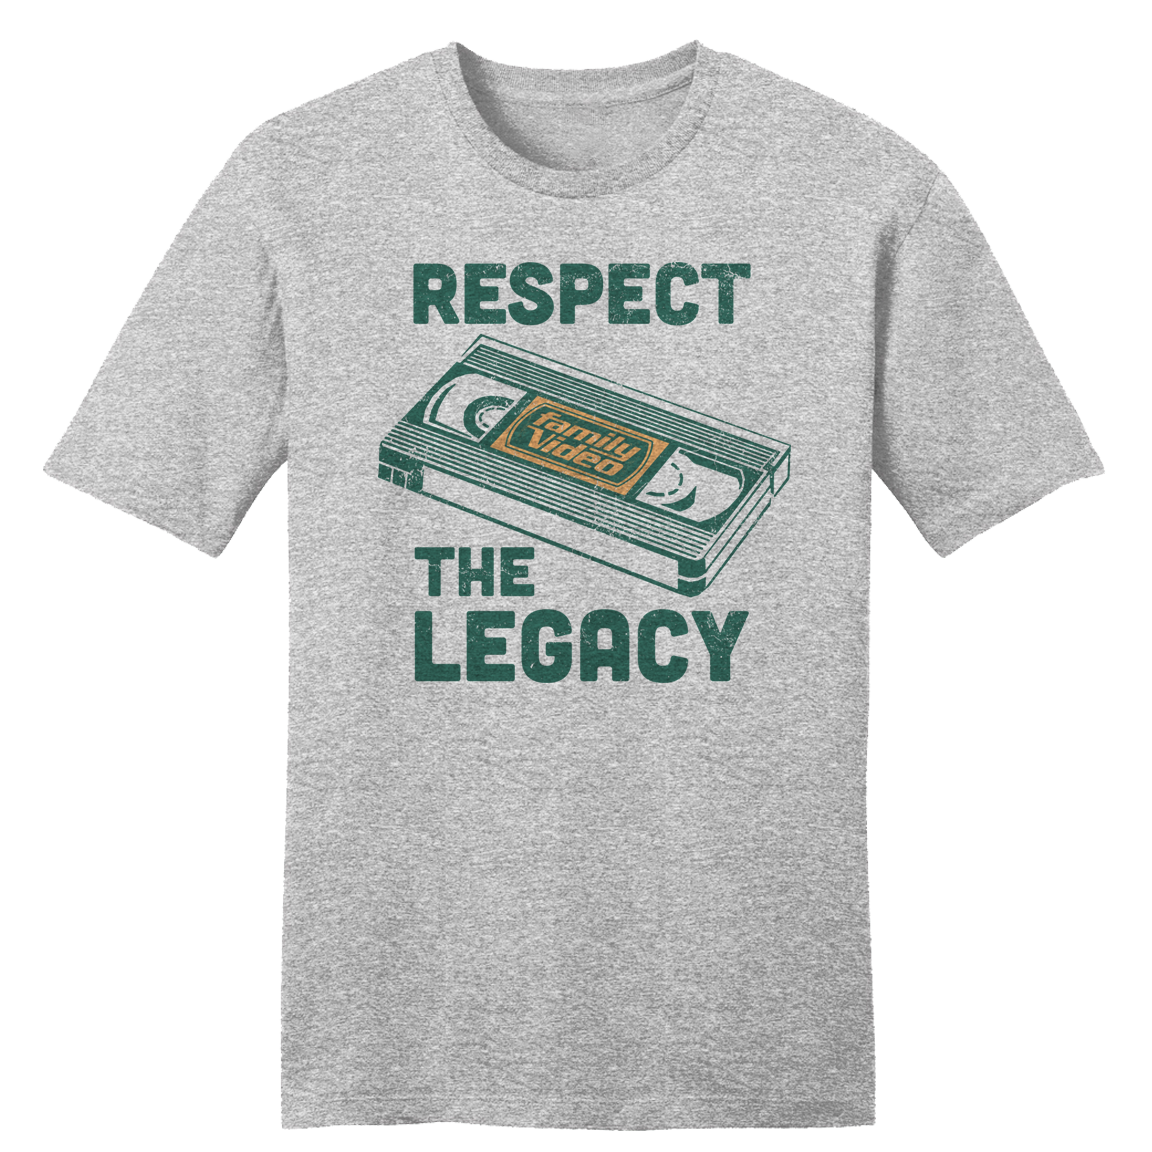 Family Video Respect the Legacy tee